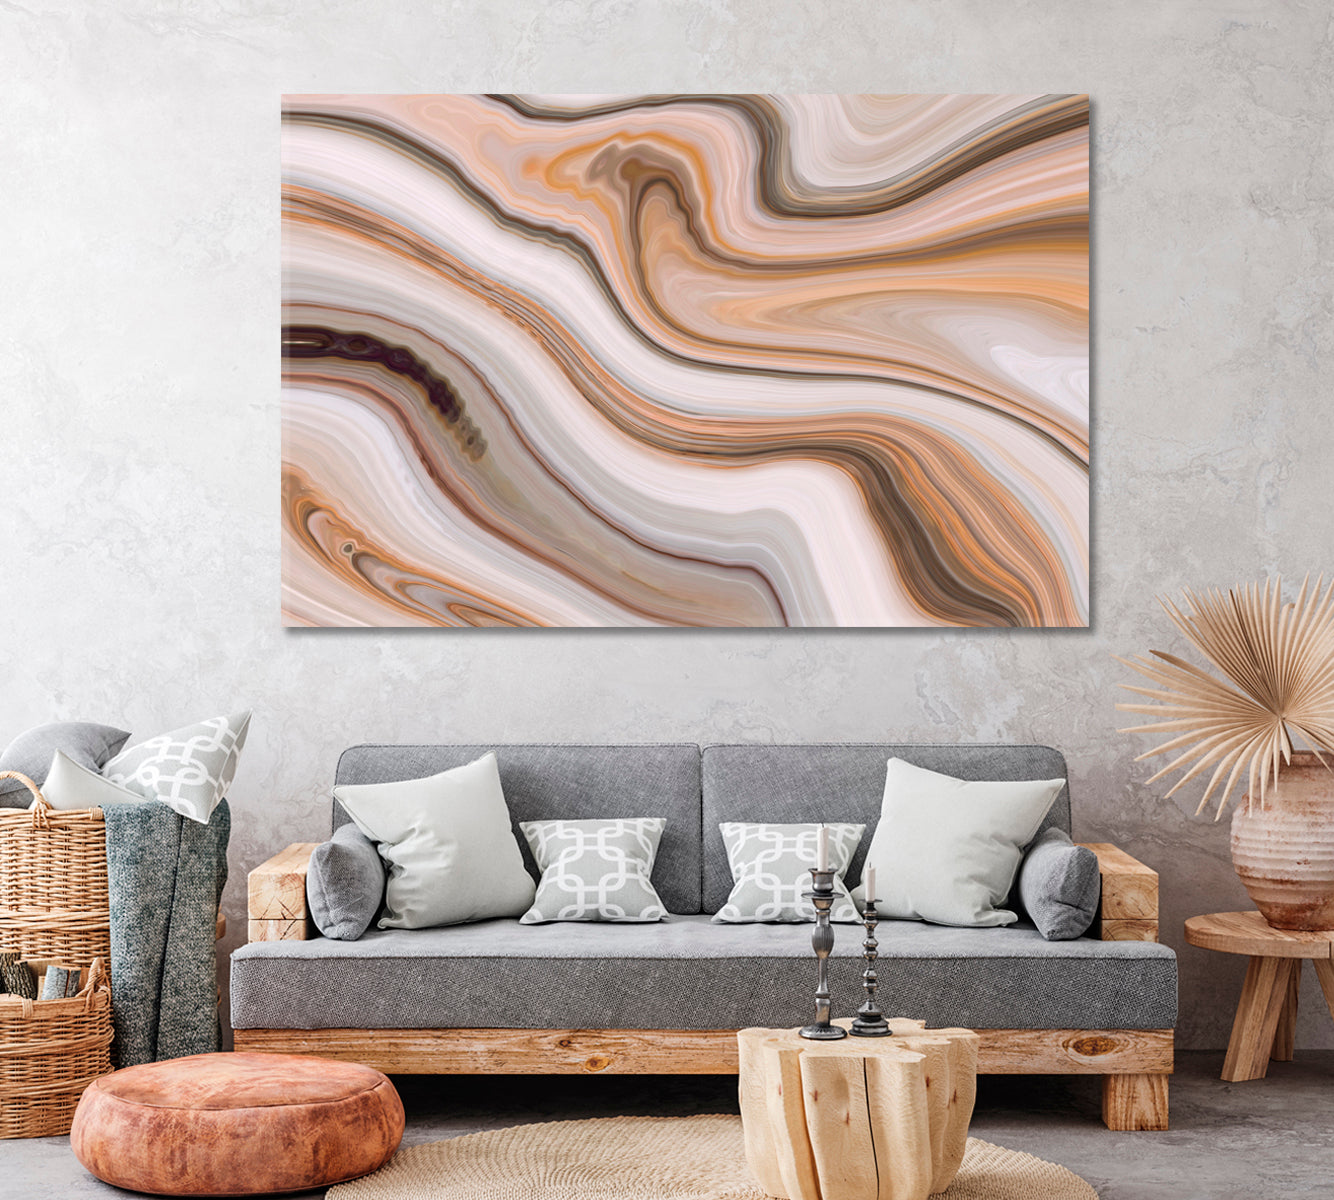 Brown Marble Ink Pattern Canvas Print ArtLexy 1 Panel 24"x16" inches 